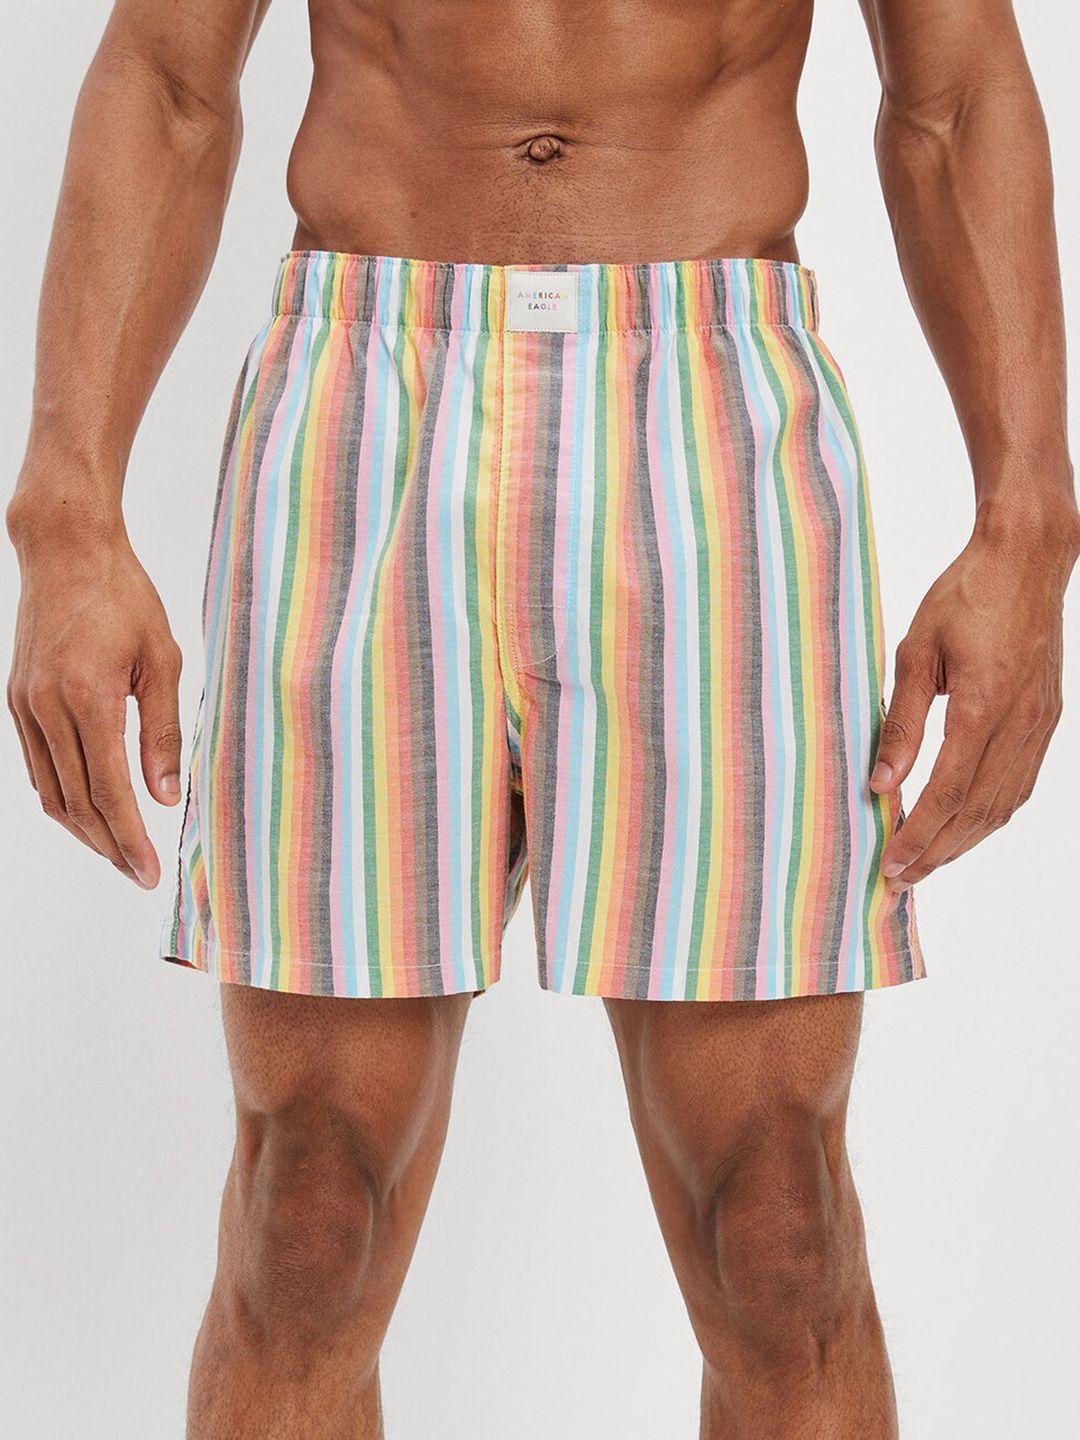 american eagle striped boxers wes0233343100